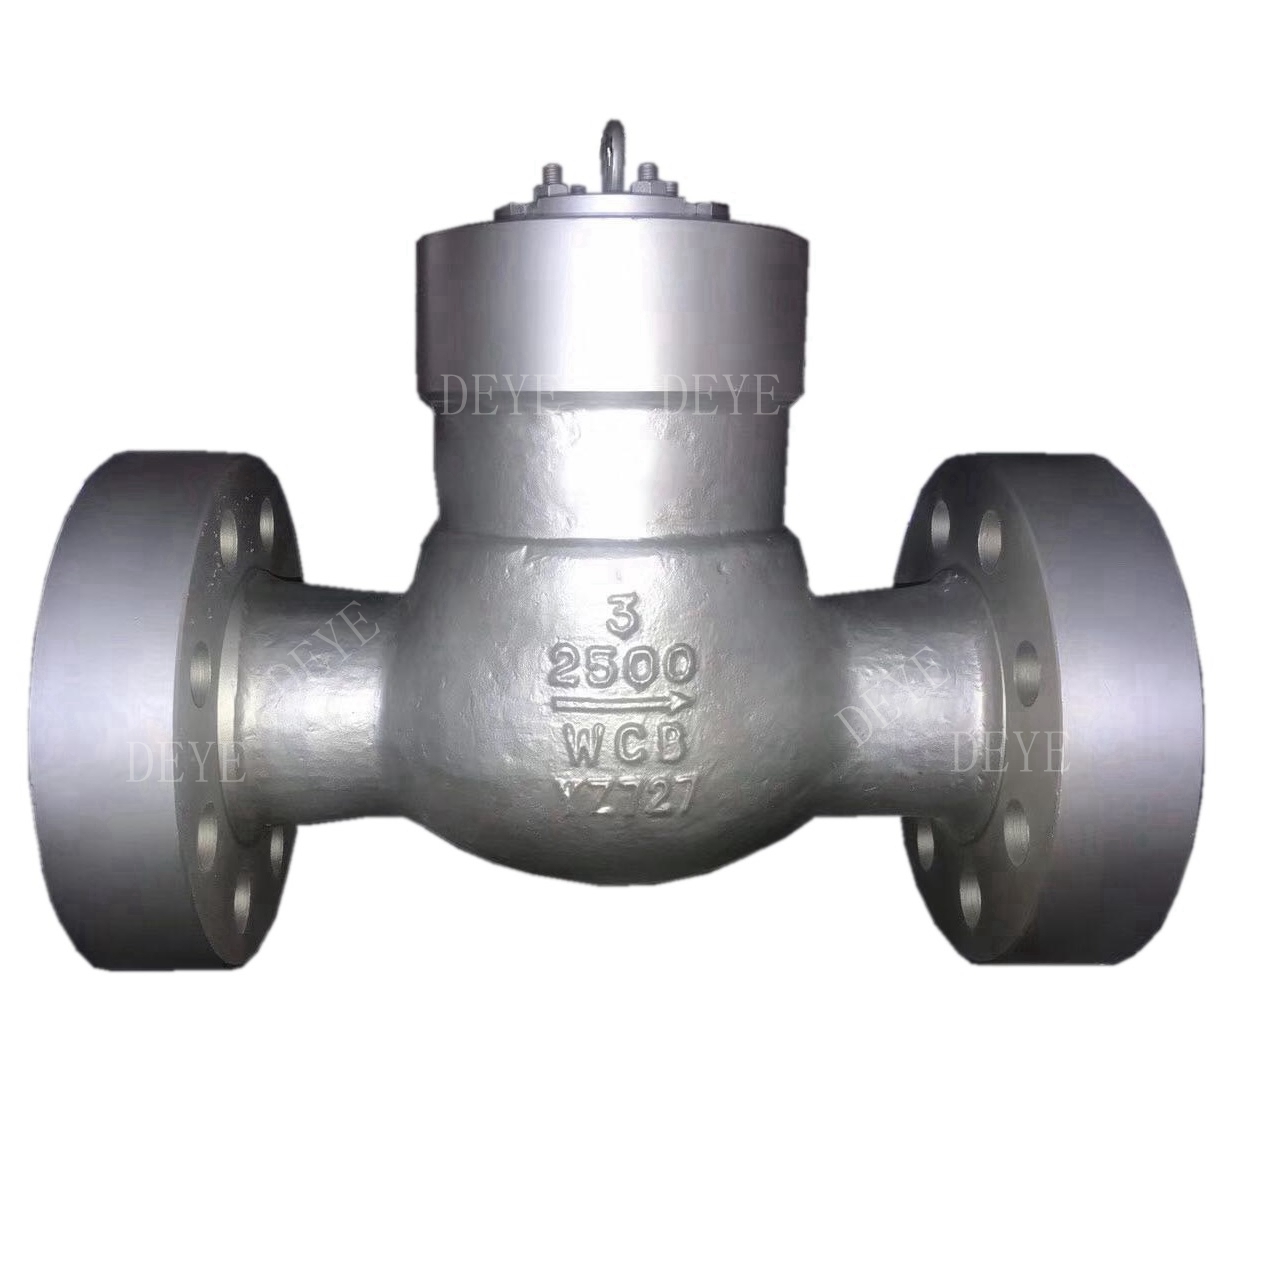 Reasonable price for Ball Valve With Iso5211 Top Flange -
 A216 WCB 2500LBS High Pressure Check Valve – Deye